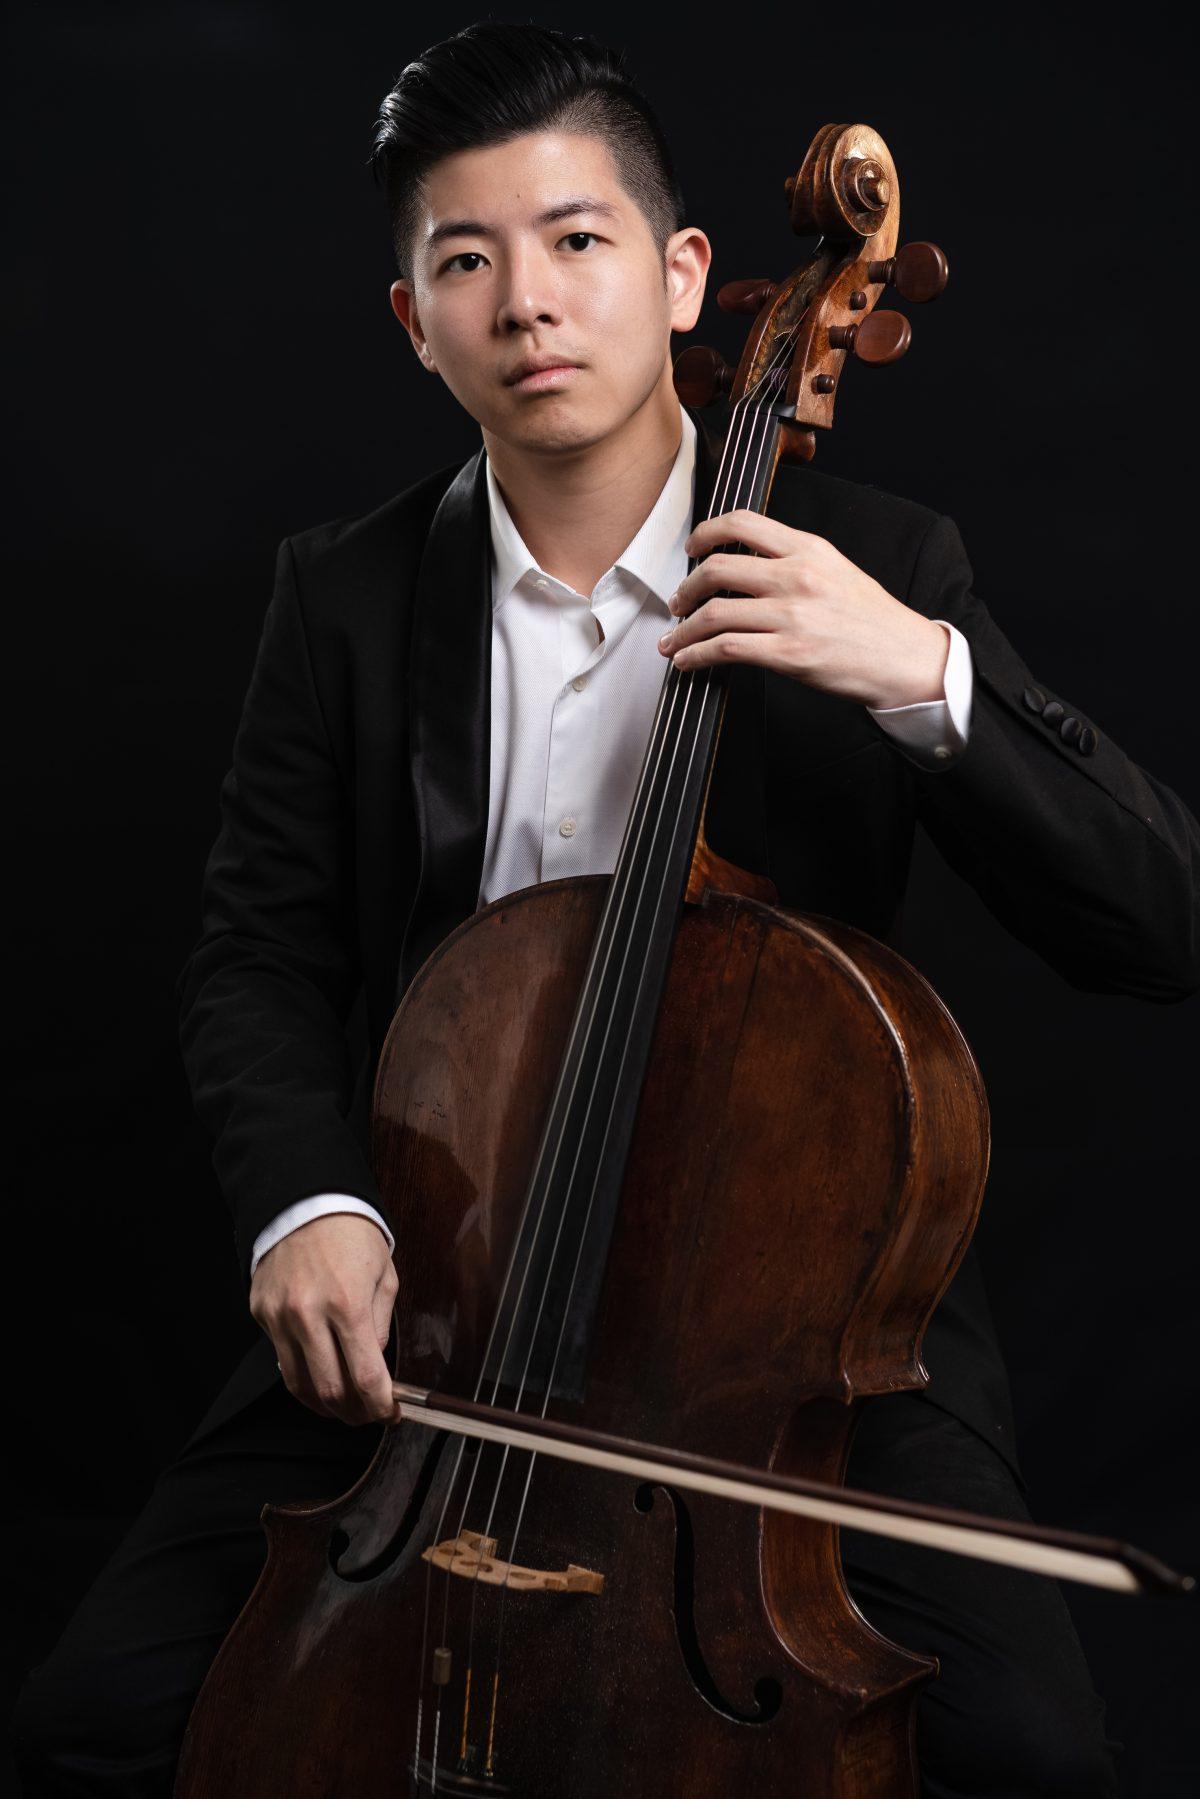 Nan-Cheng Chen, co-founder of the New Asia Chamber Music Society, graduated from The Juilliard School of Music in New York. (New Asia Chamber Music Society)